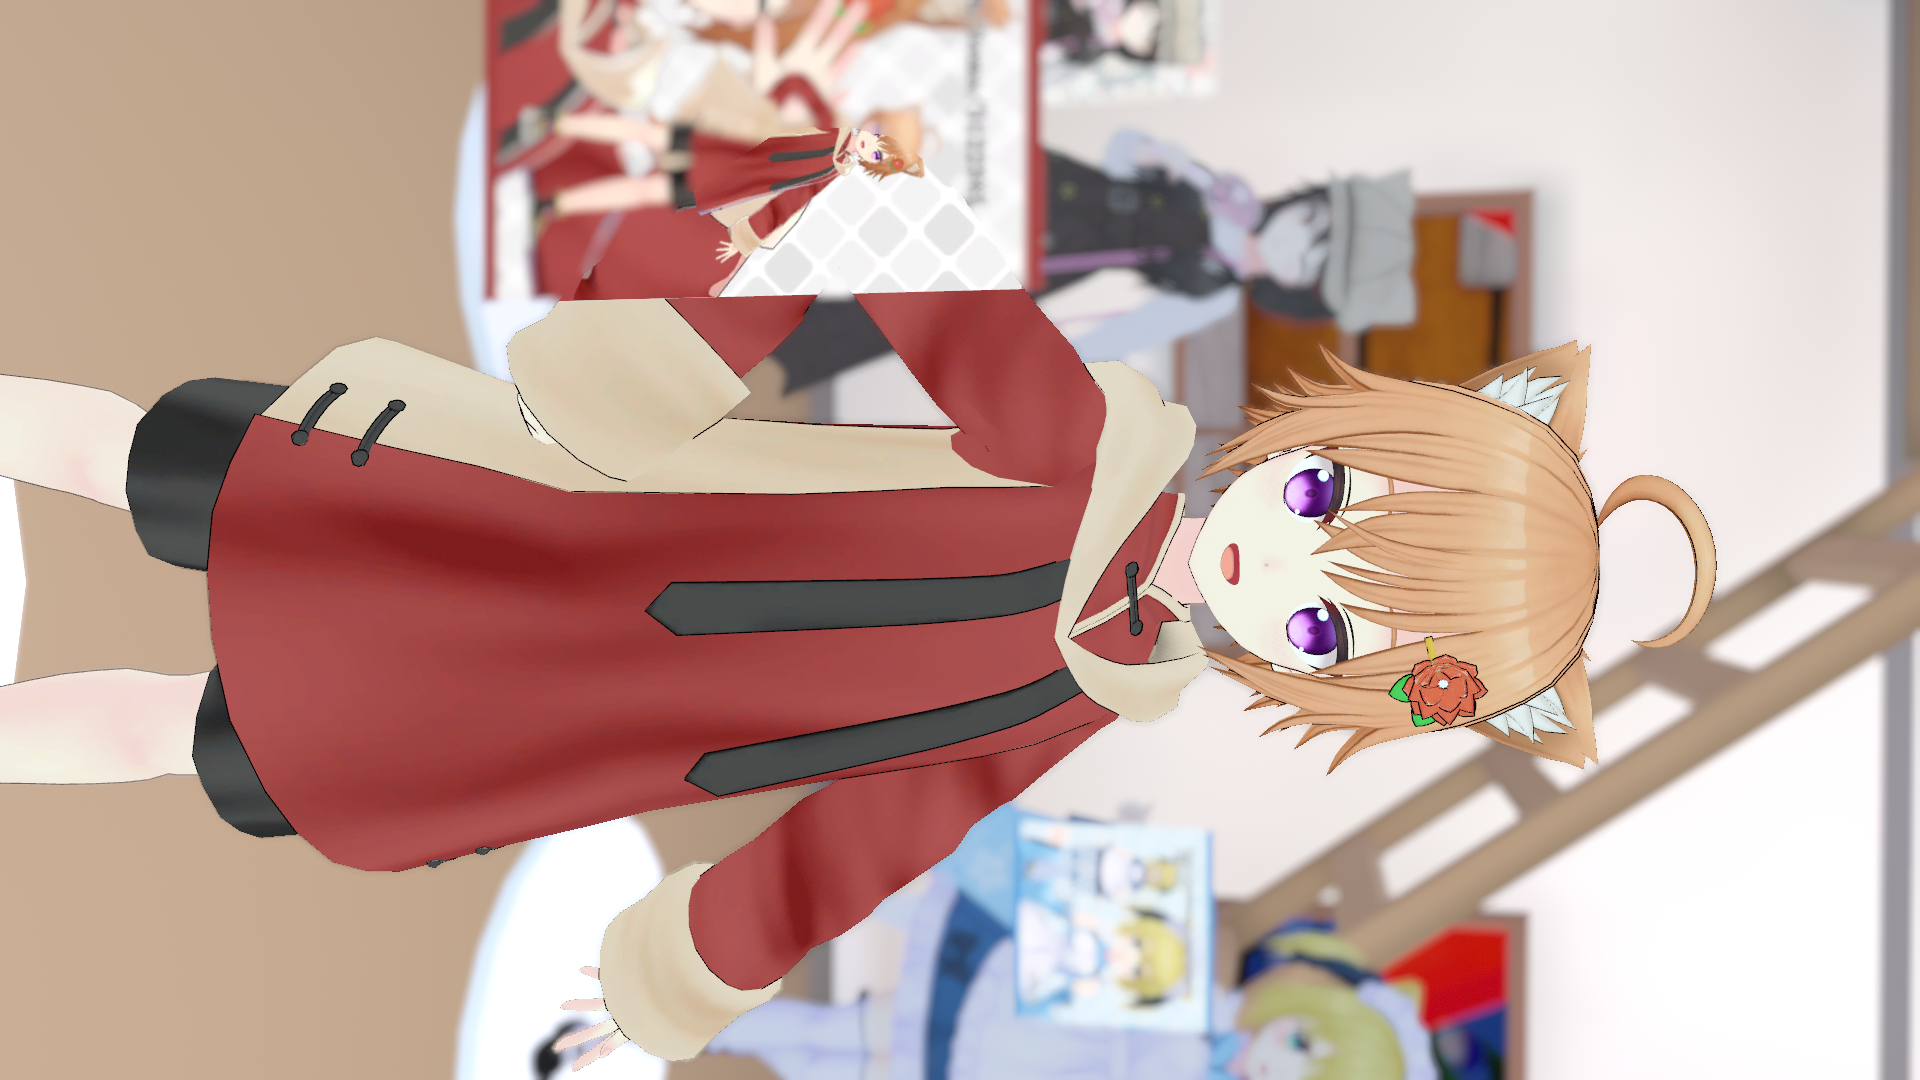 VRChat_1920x1080_2021-12-05_04-58-02.819.png